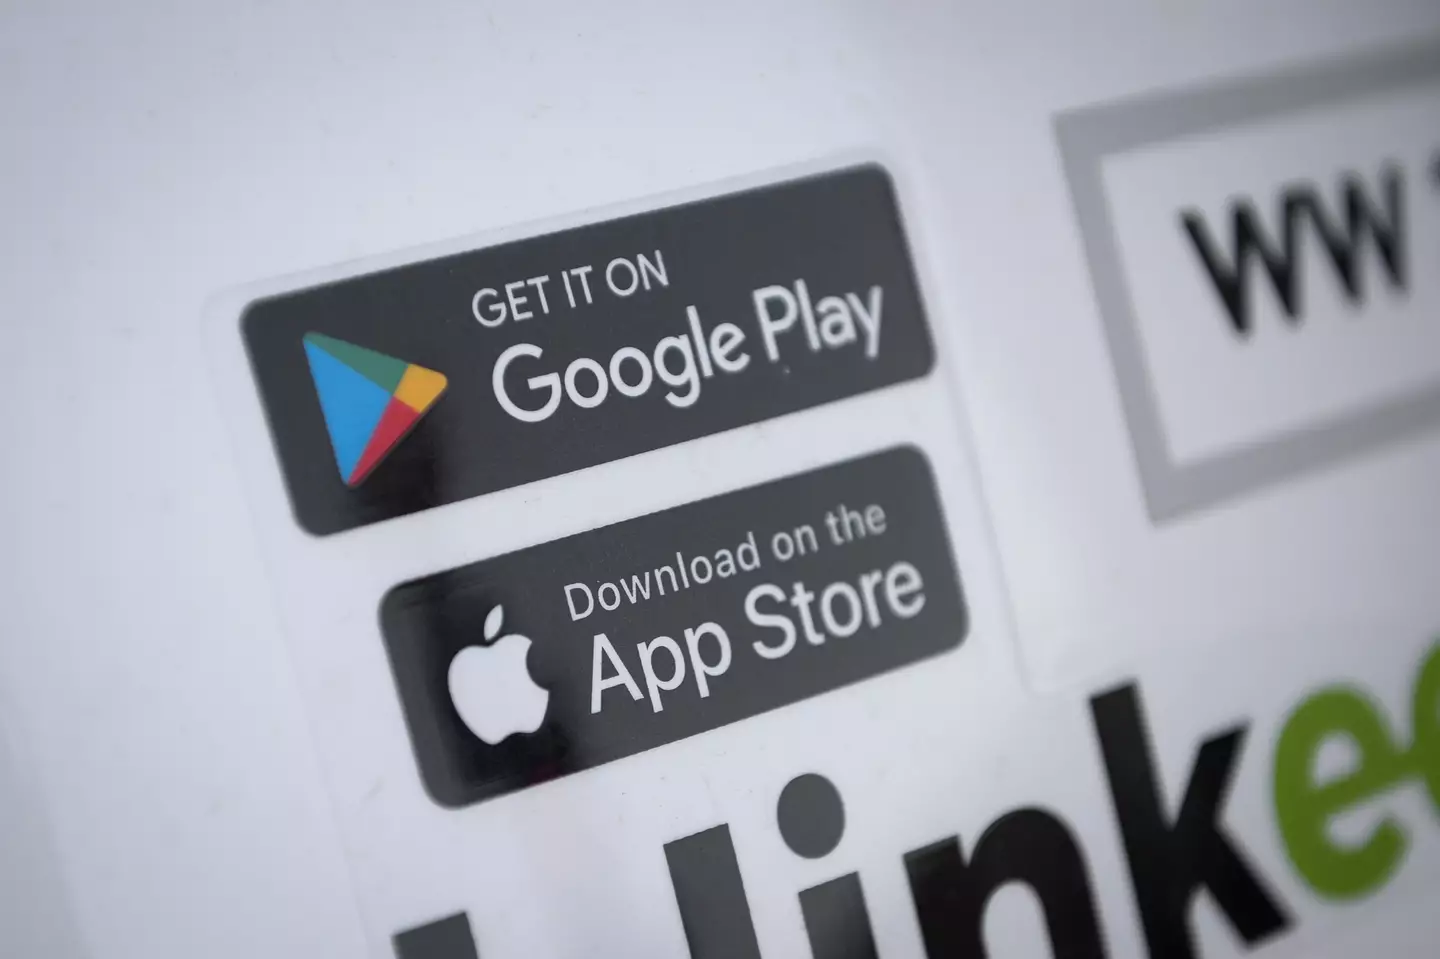 Third-party apps like Google Play will become available on iPhones.